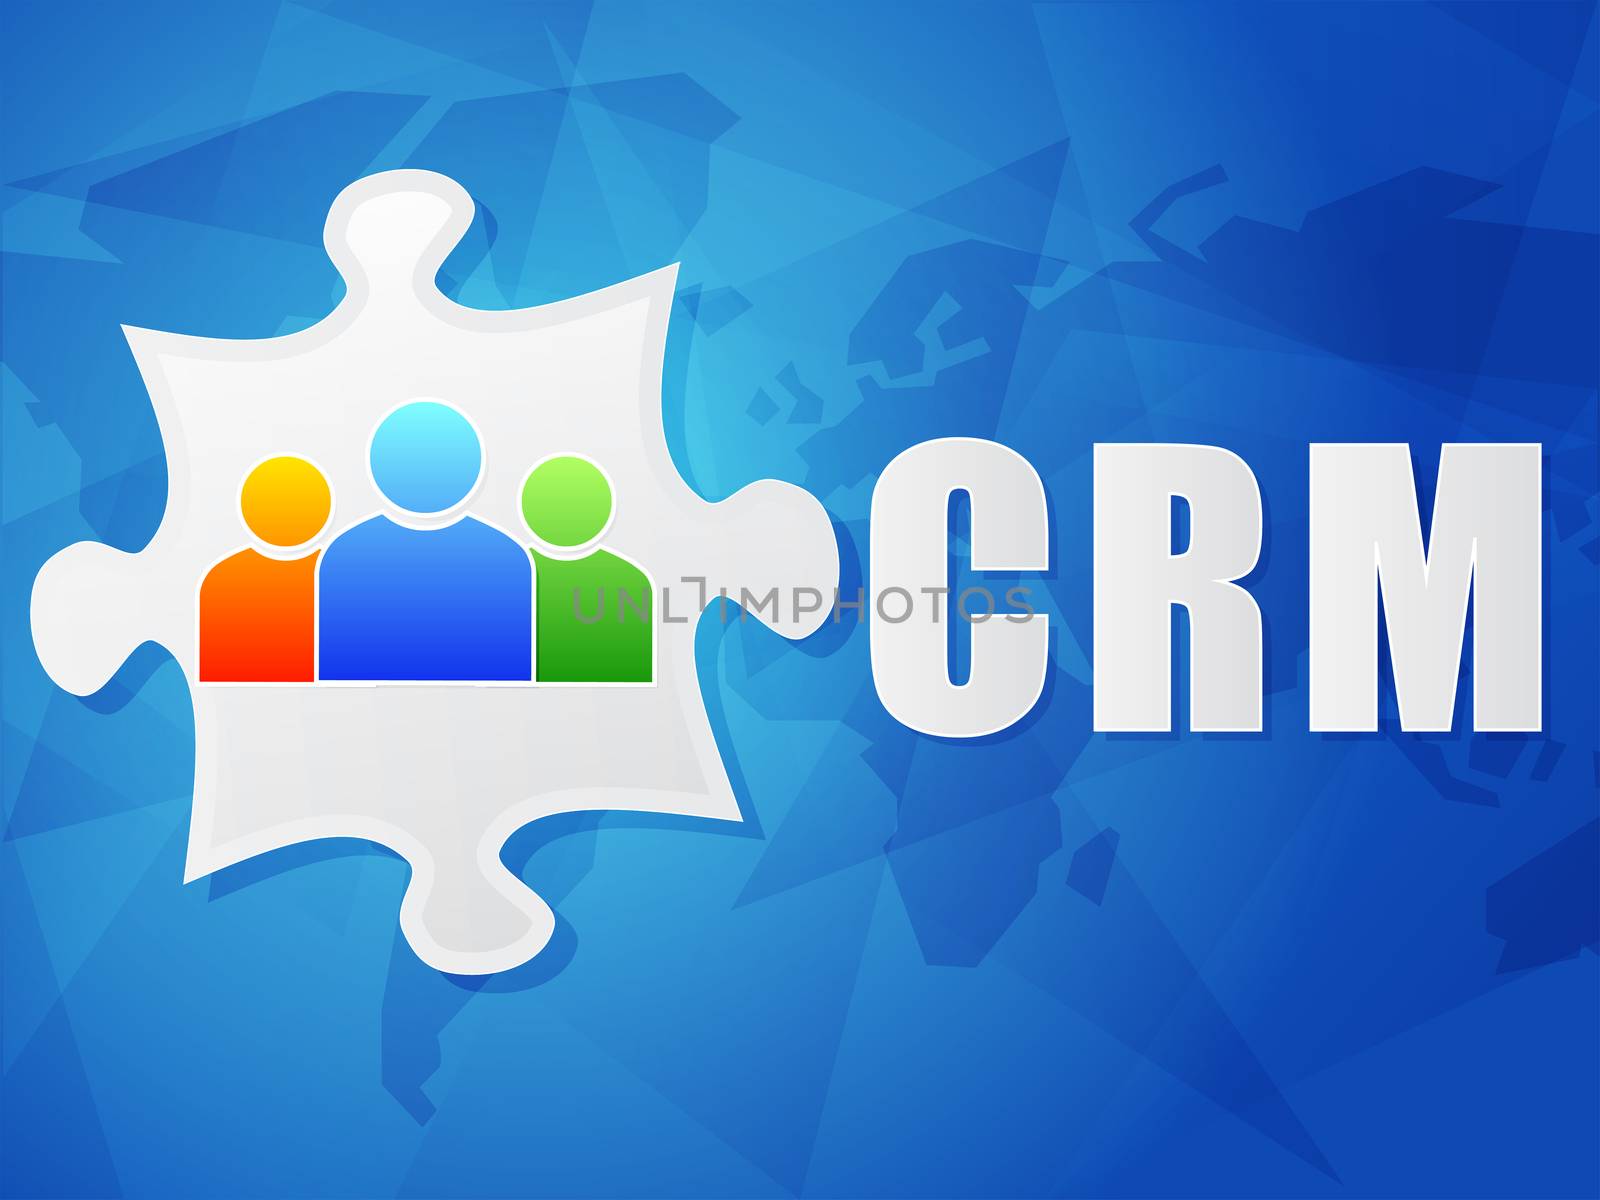 CRM - customer relationship management and puzzle piece with person signs over blue background, flat design, business concept